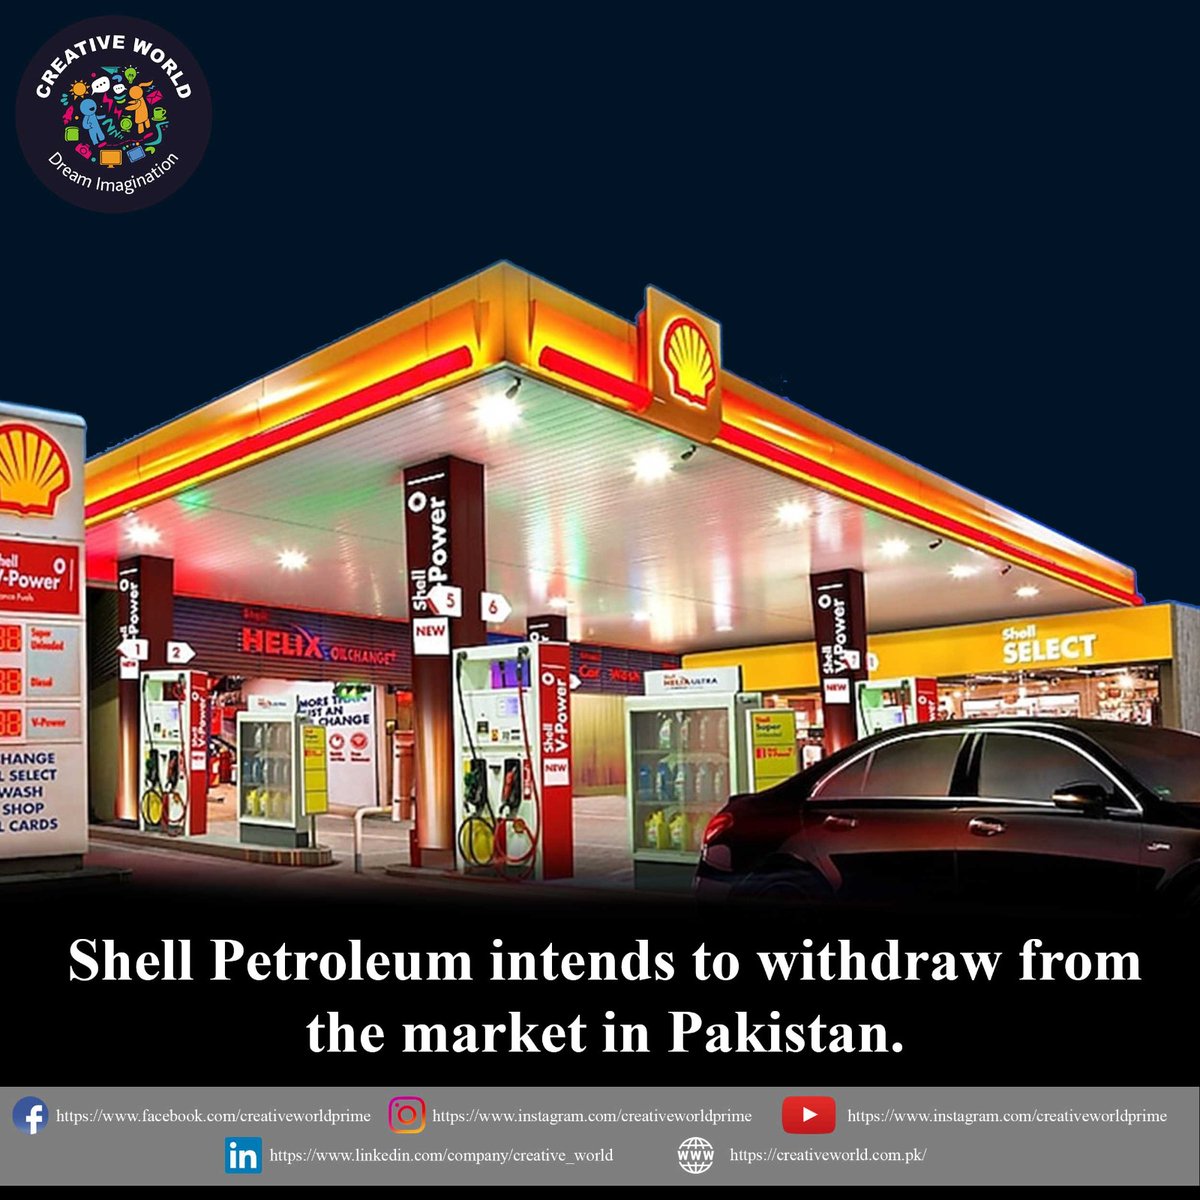 Shell Petroleum has made the difficult decision to withdraw from the market in Pakistan. 
 #viralpost #trendingpost #news #NewsUpdate #shellpetroleum #withdrawal #pakistanmarket #businessdecisions #refocus #transition